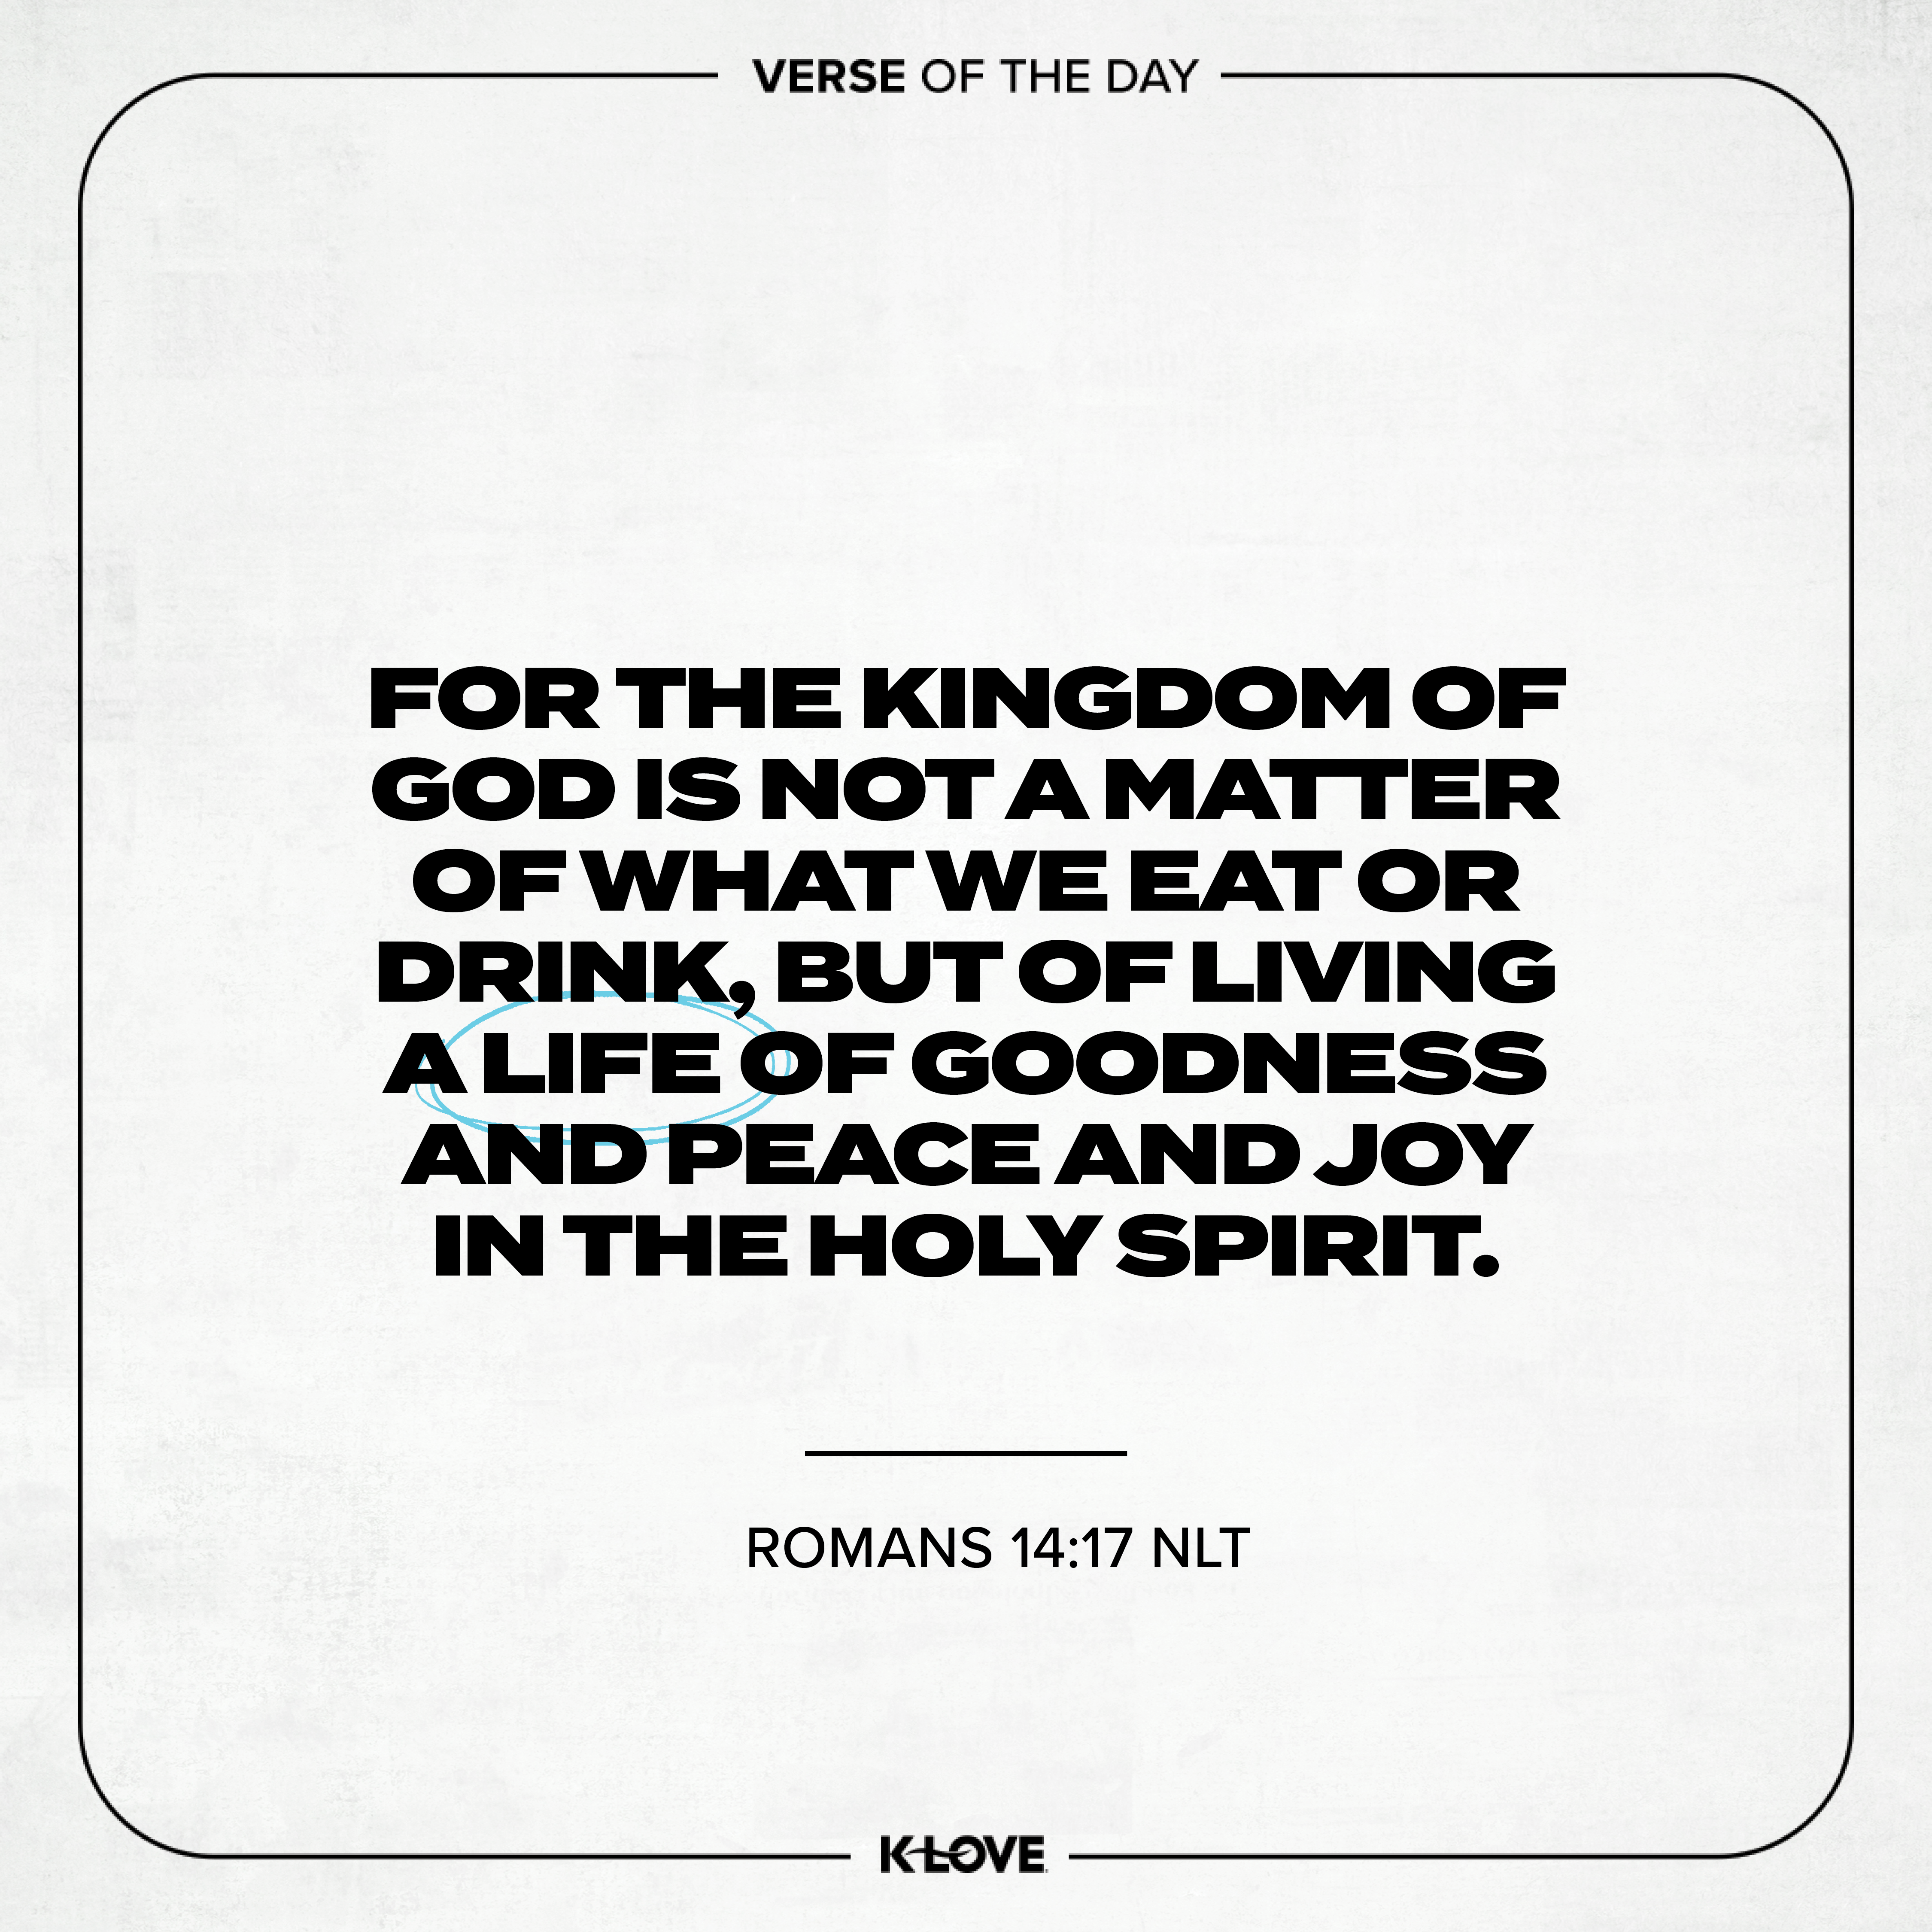 For the Kingdom of God is not a matter of what we eat or drink, but of living a life of goodness and peace and joy in the Holy Spirit.